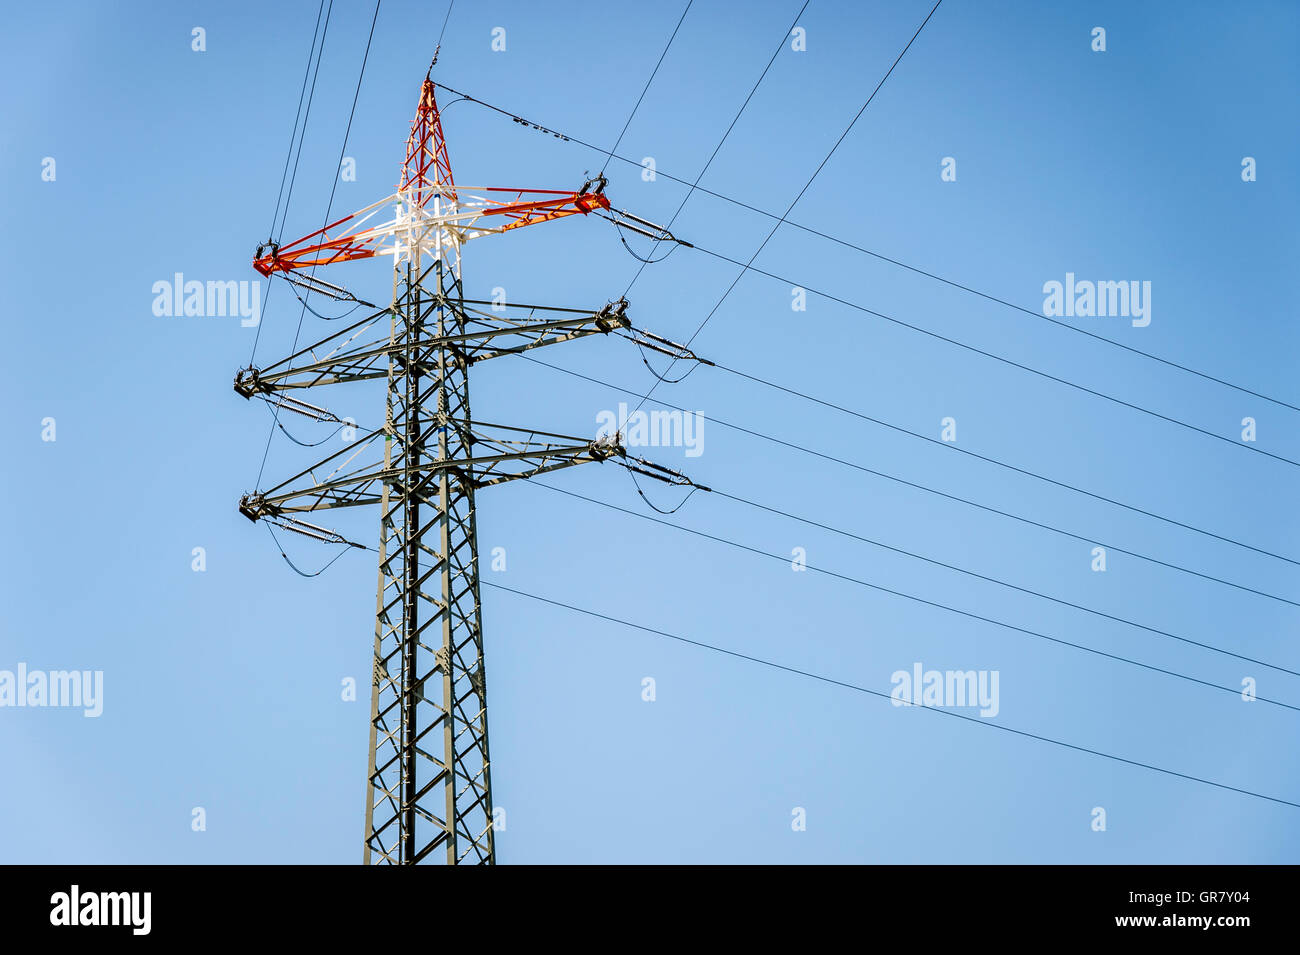 Corner Mast Of A High Voltage Power Line With A Red Tip Against A Blue Sky Stock Photo